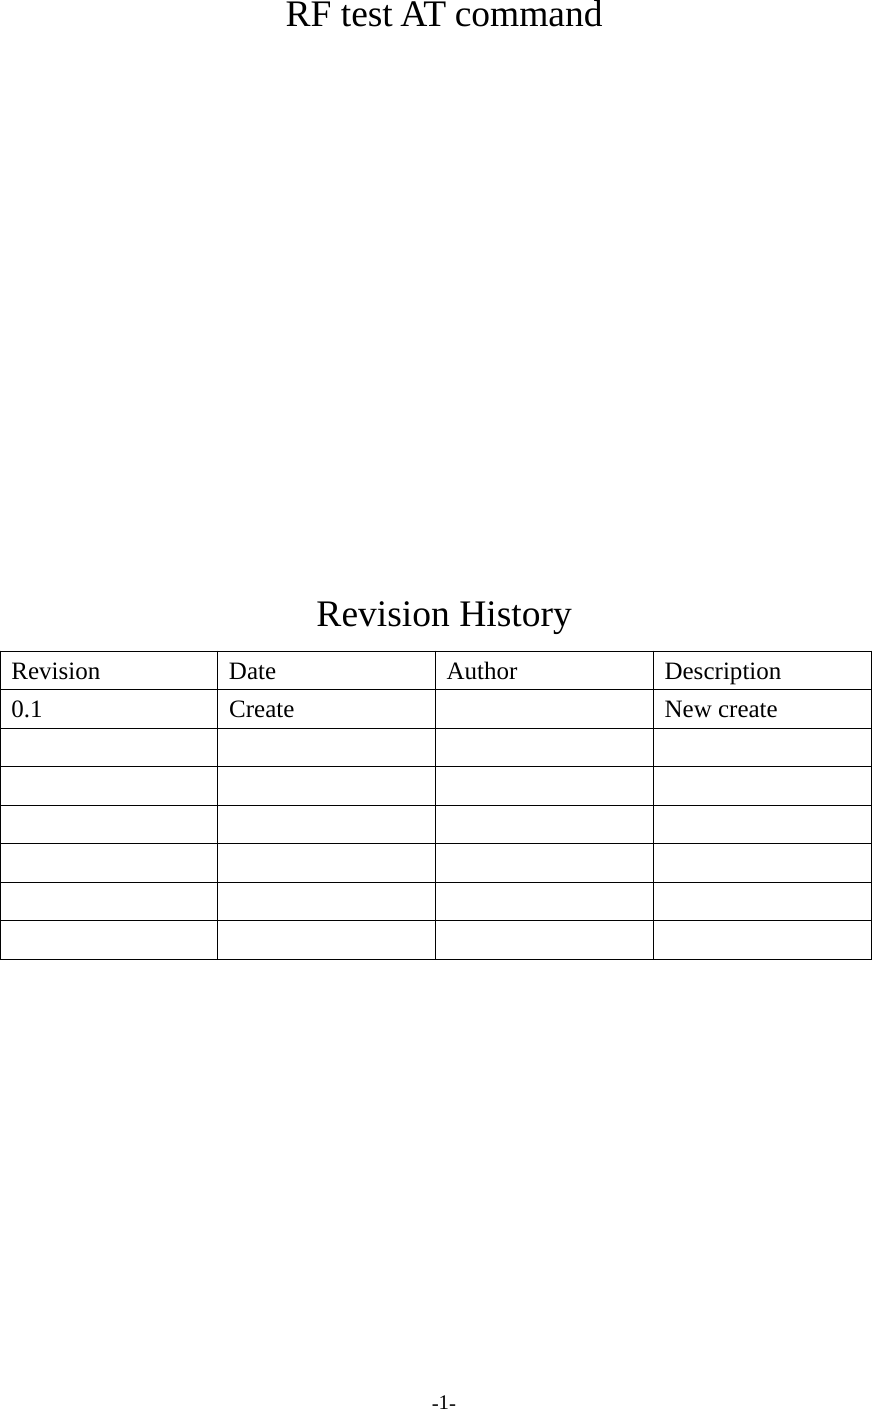 -1-RF test AT commandRevision HistoryRevision Date Author Description0.1 Create New create